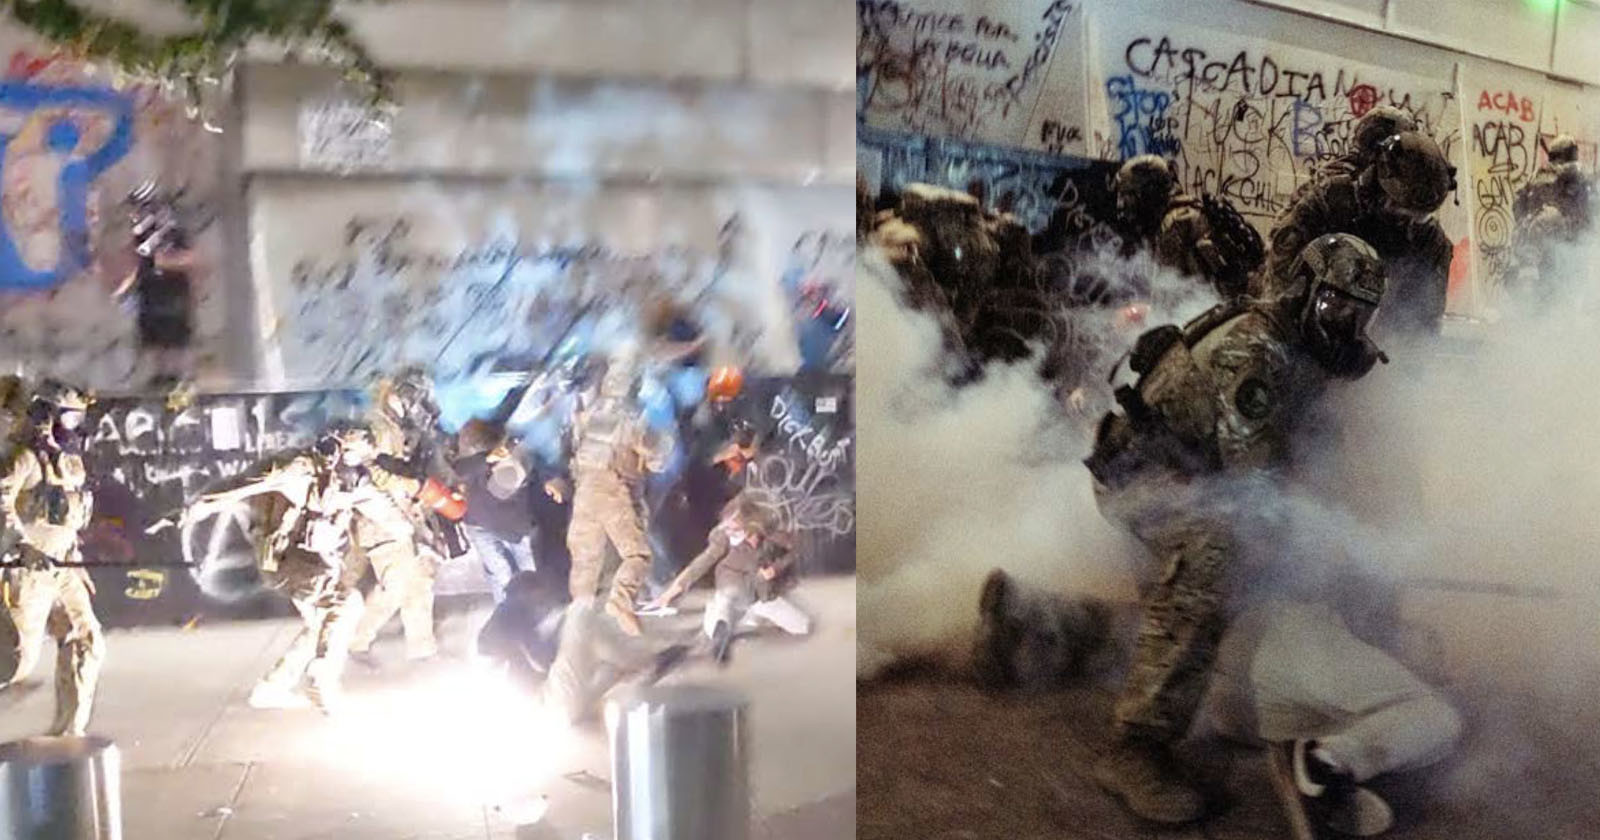 Photographer Claims Police Threw Him onto an Exploding Gas Canister